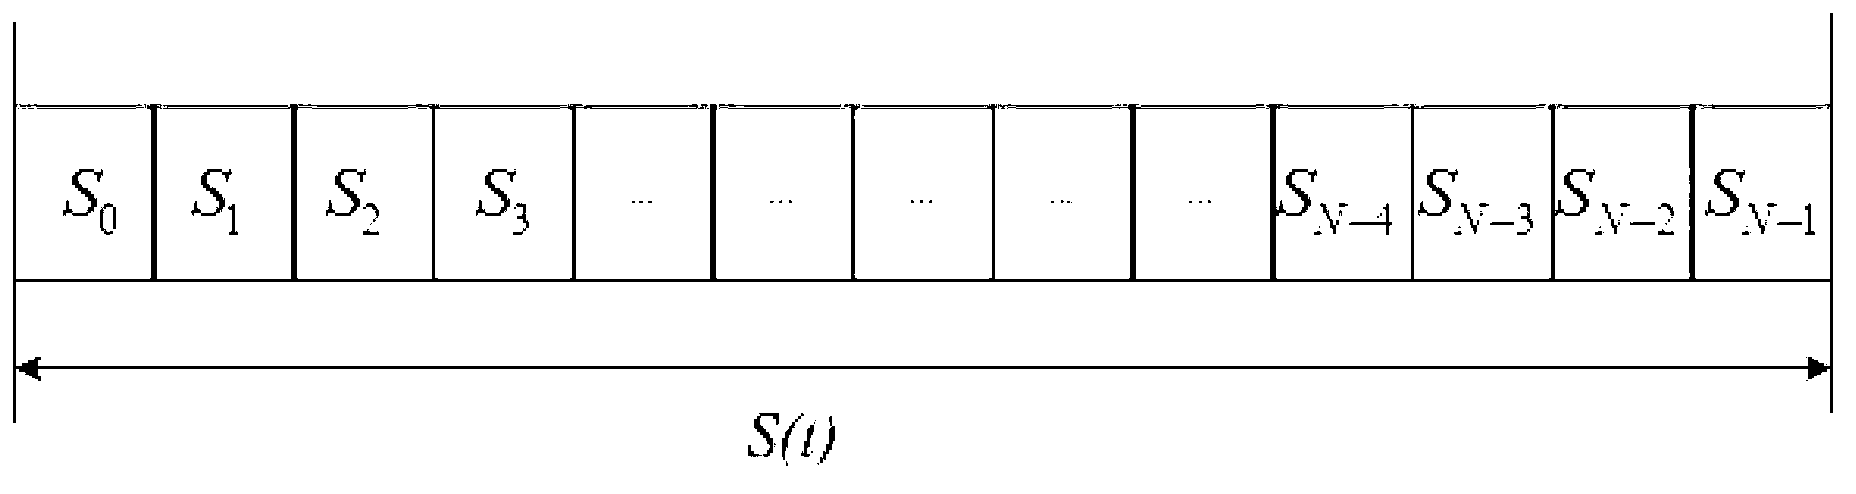 Synchronous signal generating method and device of power line carrier communication system